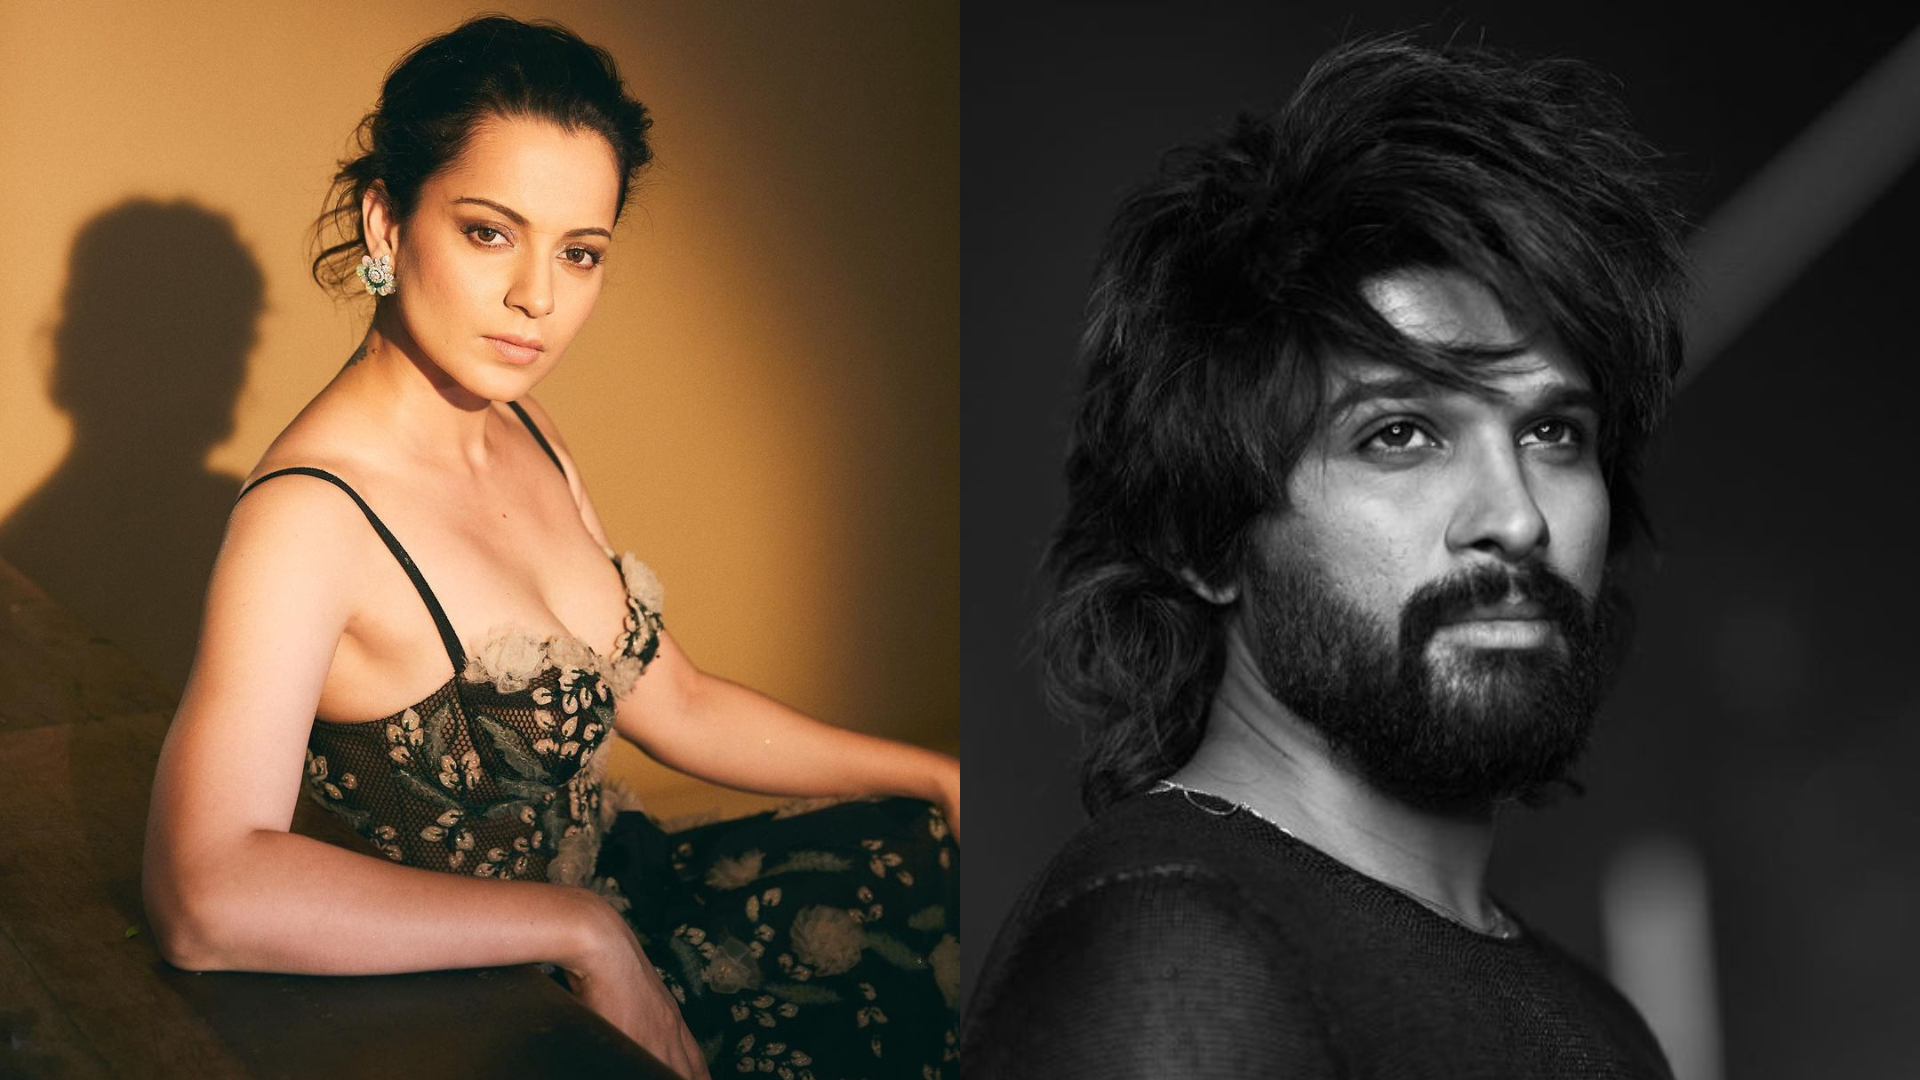 Kangana Ranauts Thalaivi Allu Arjuns Pushpa and others make it to SIIMA nominations - Check out the full list here